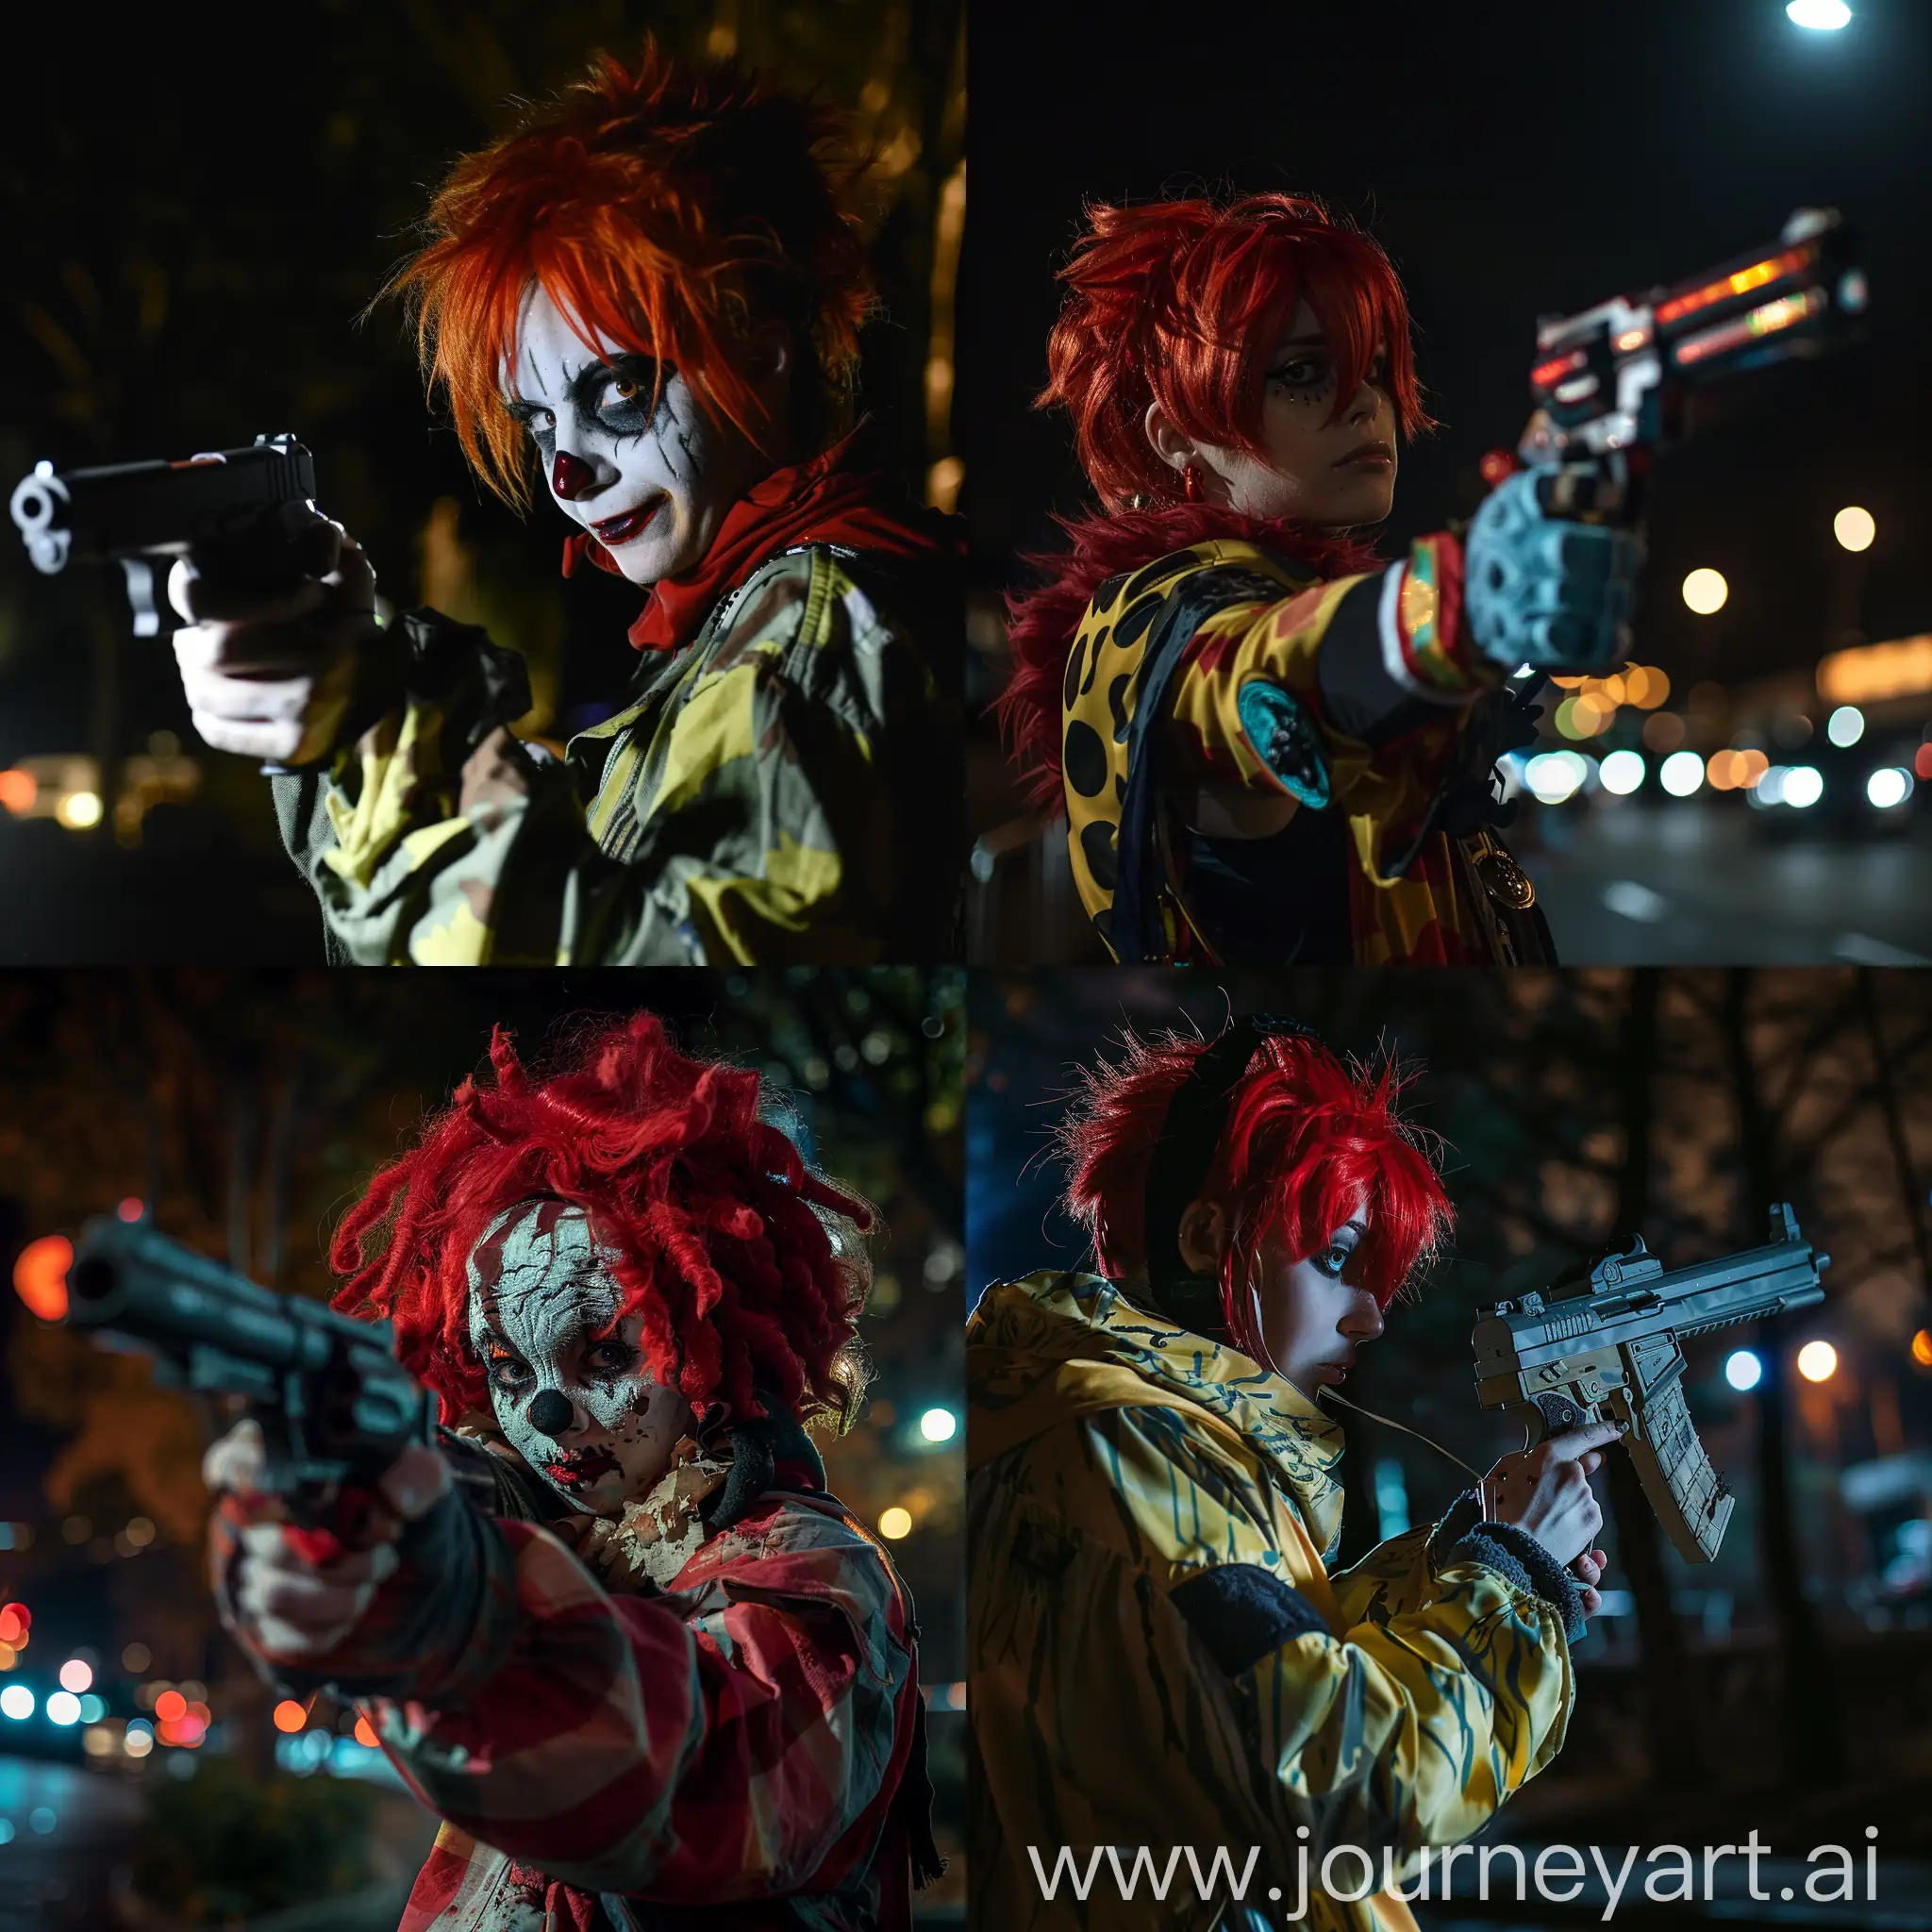 a person with red hair dressed as a gun for halloween at night time